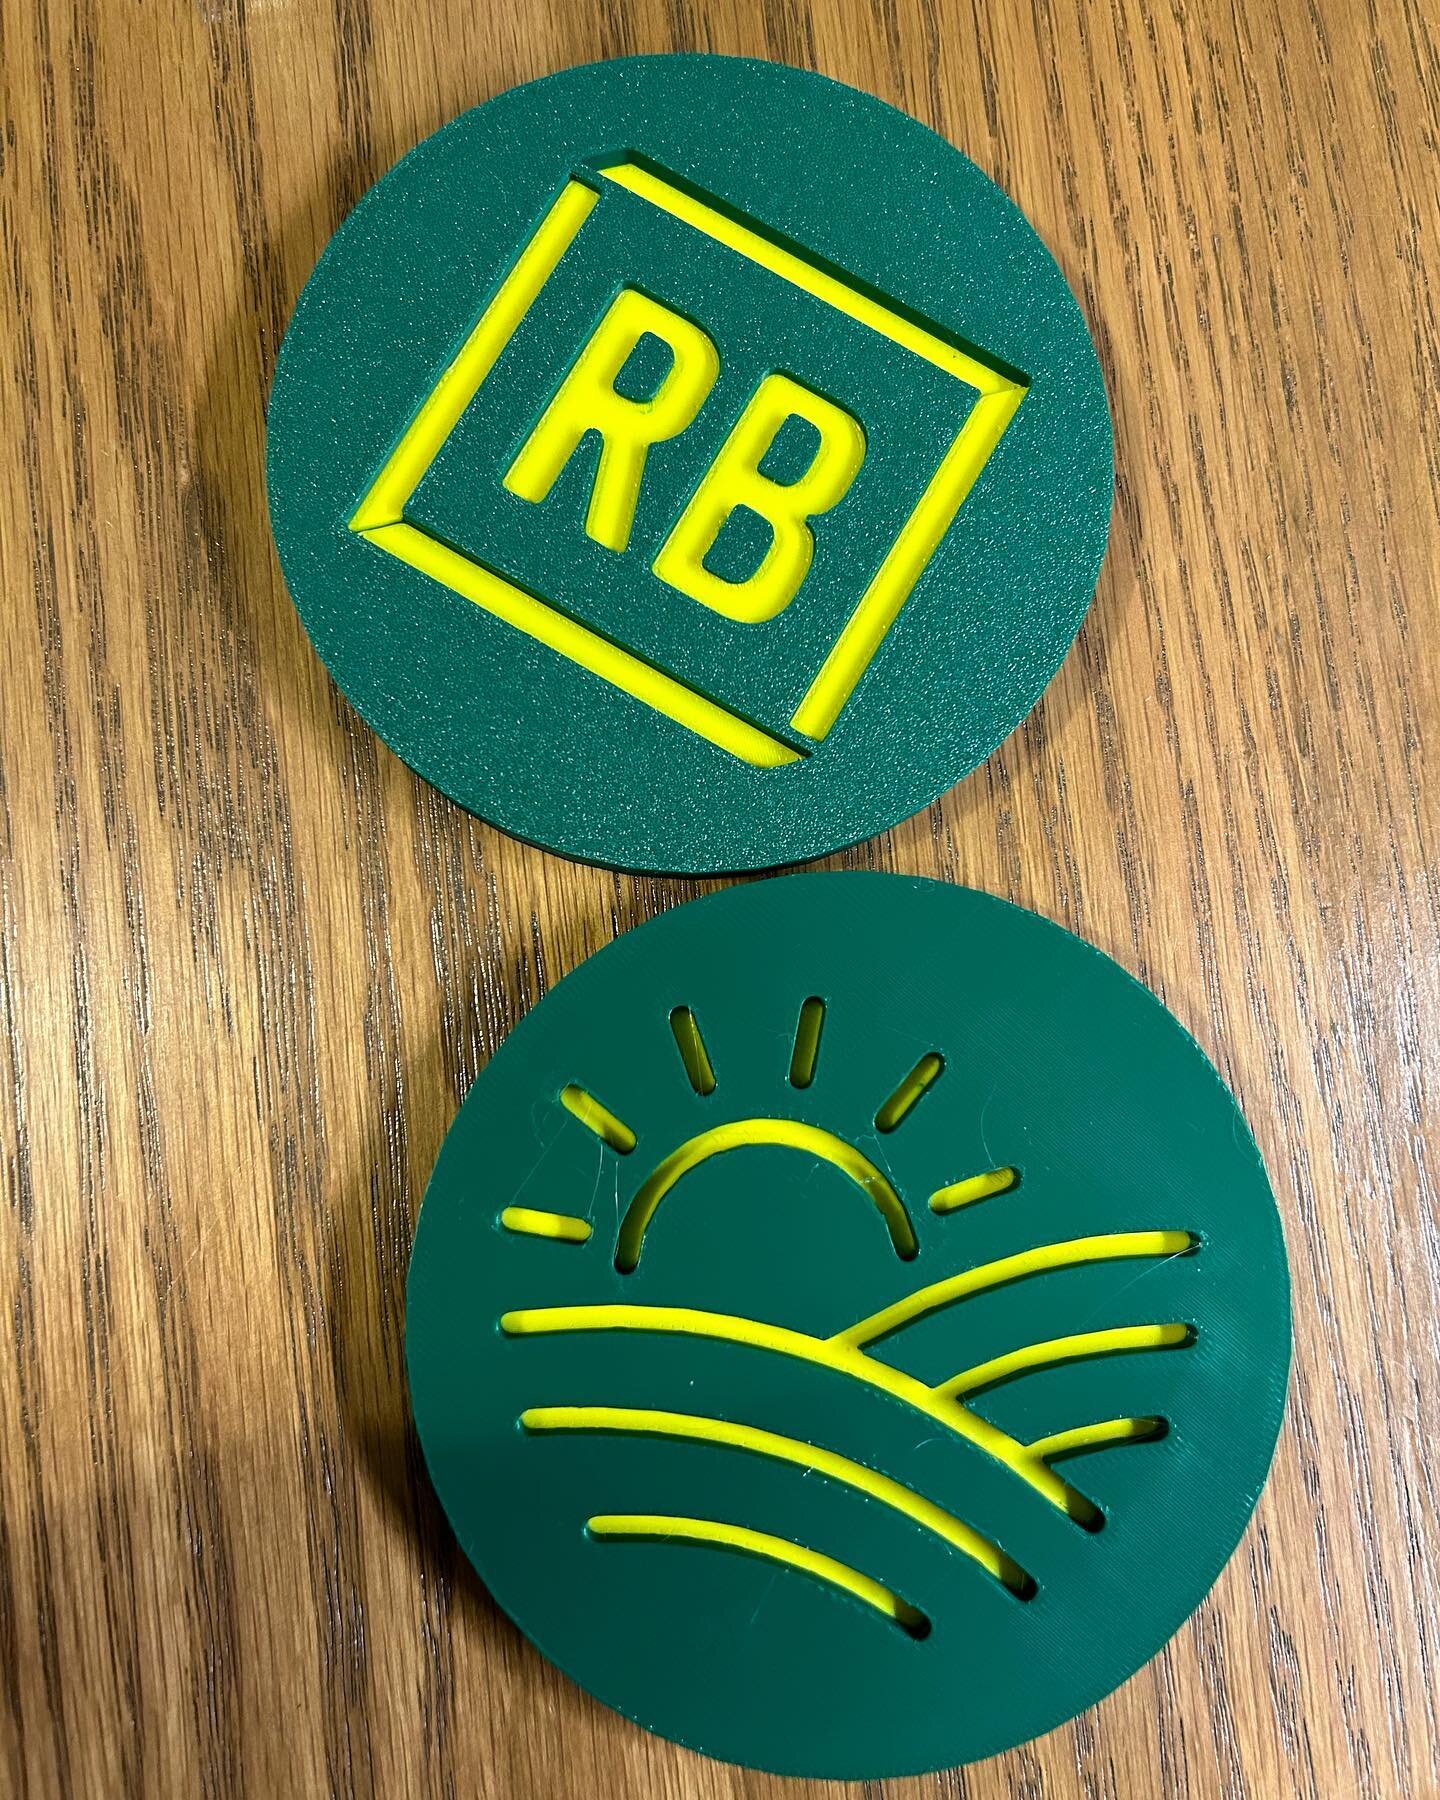 We&rsquo;ve been quiet for a while on social media, but have had some fun projects come through. These coasters were fun to make! If you need anything designed and printed, let us know if we can help!